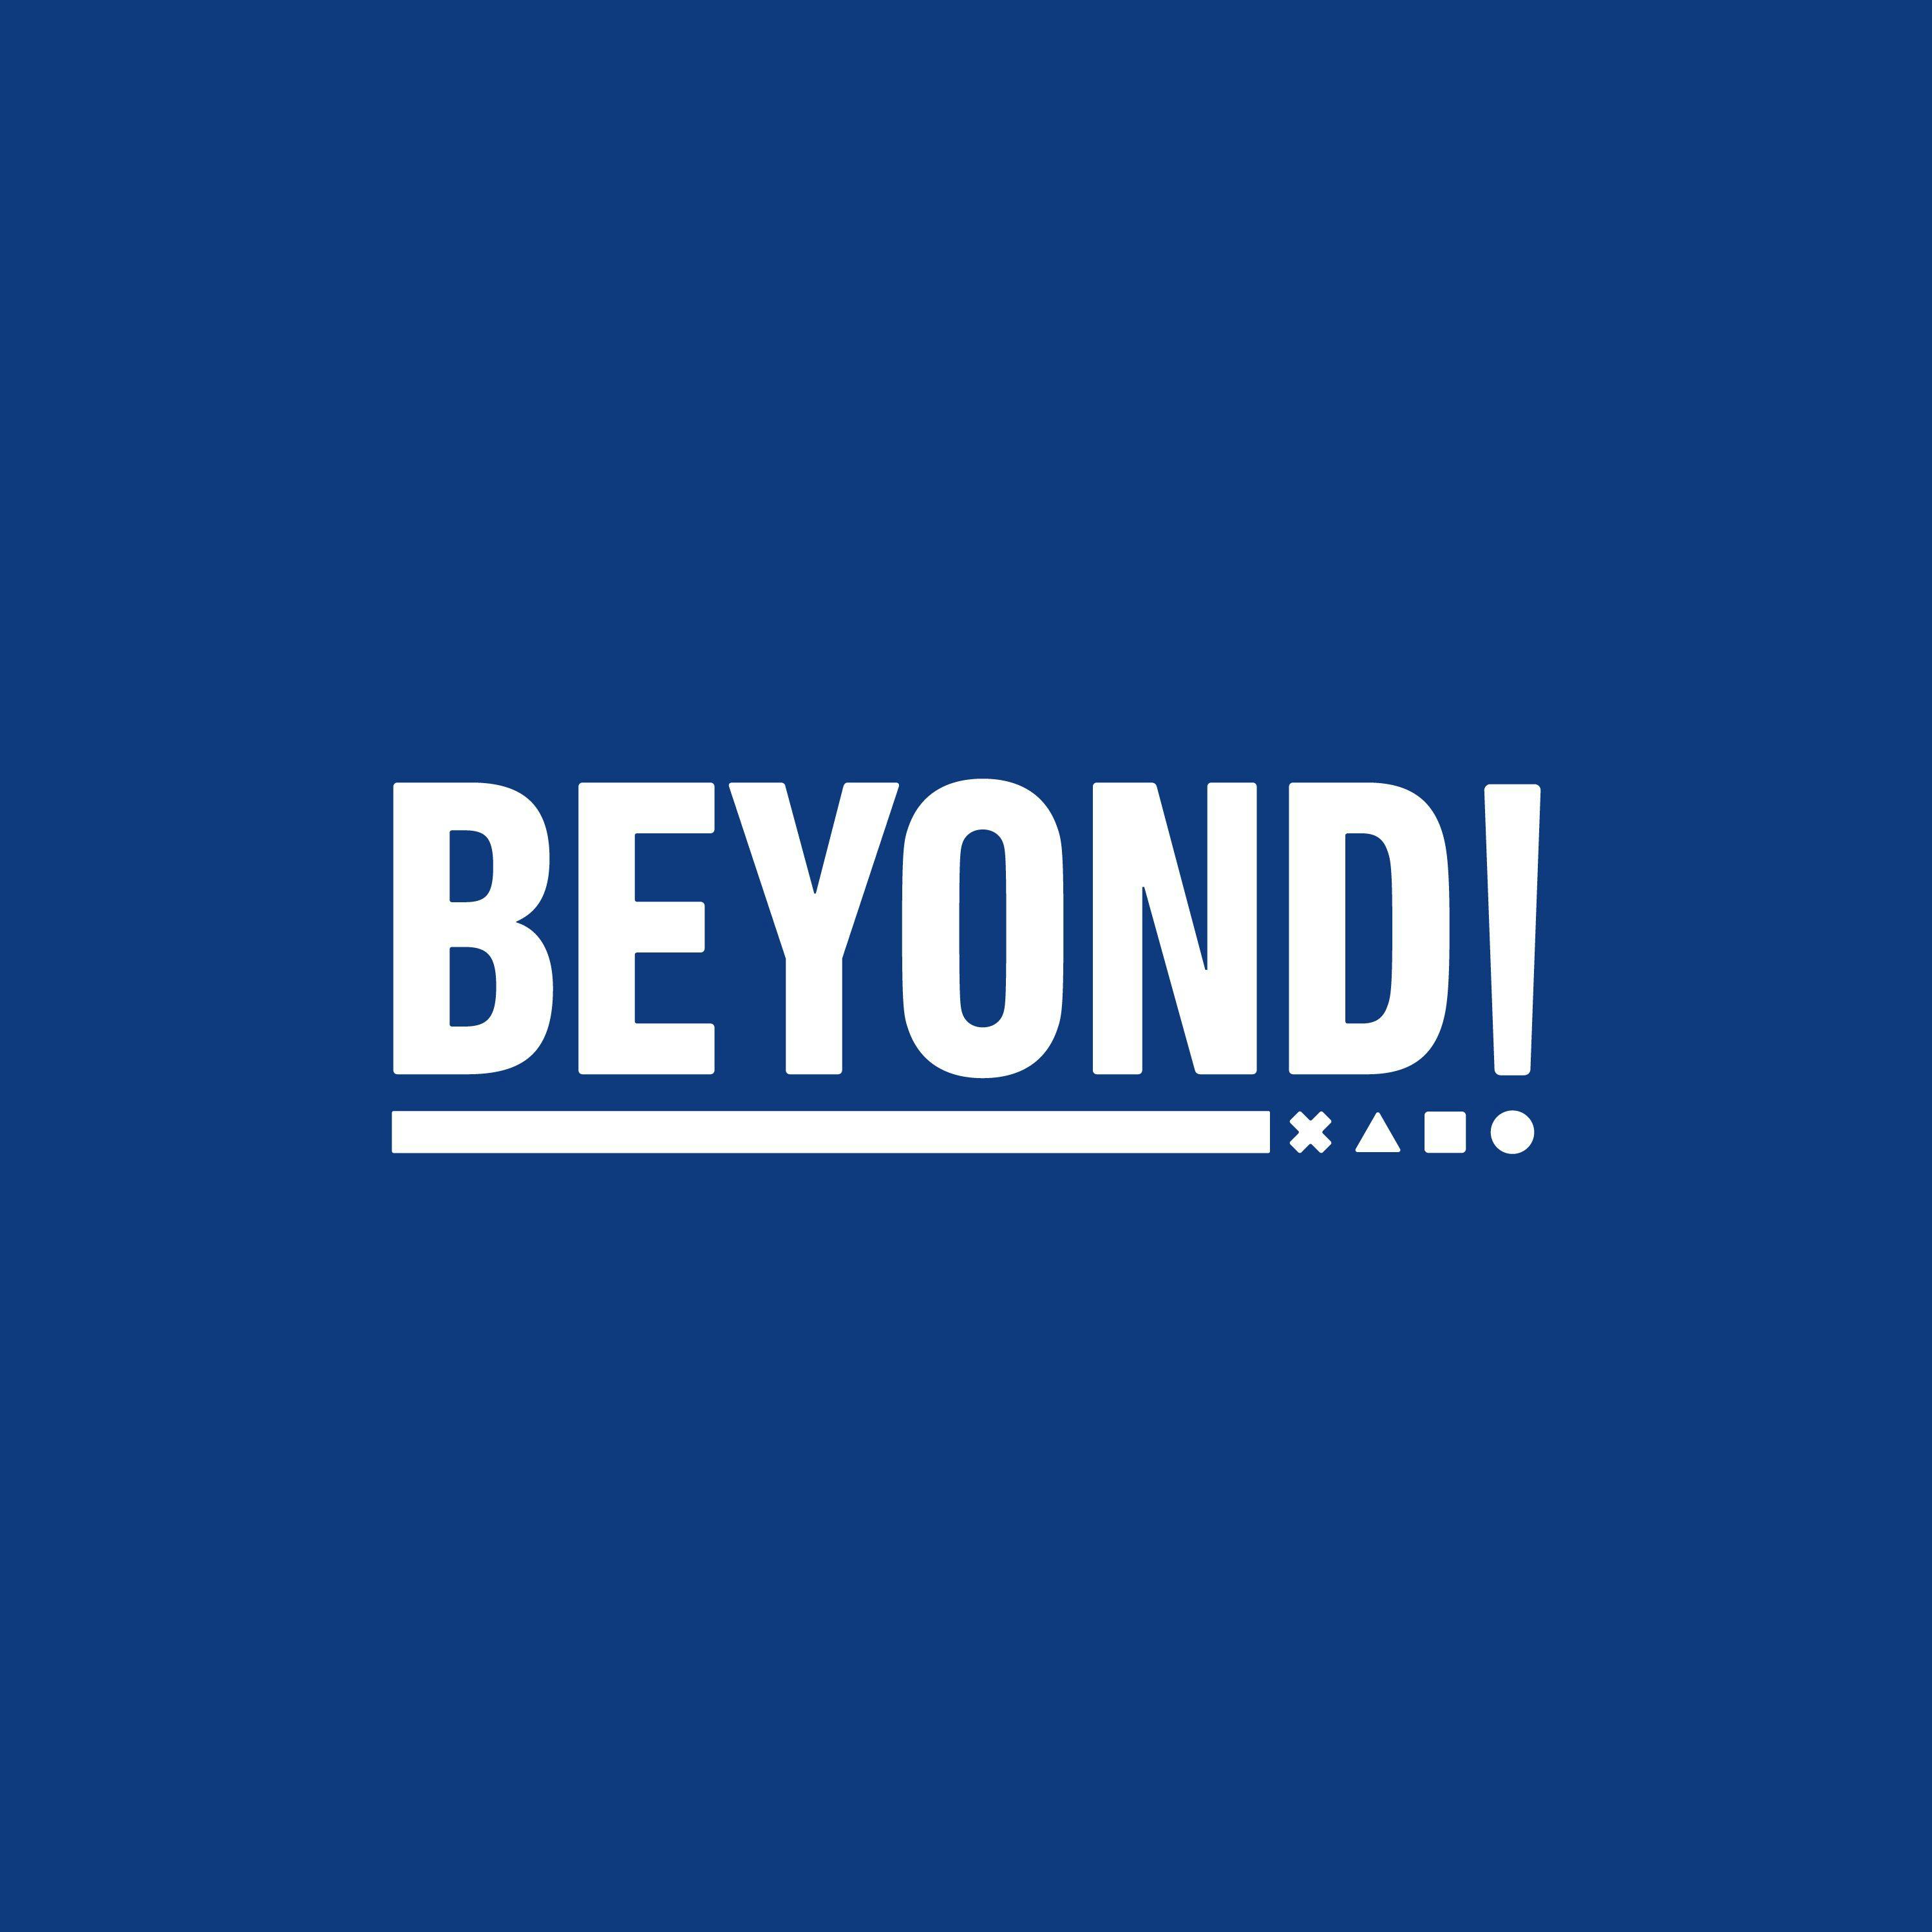 Discussing the Director's Cut Debate - Beyond Episode 709